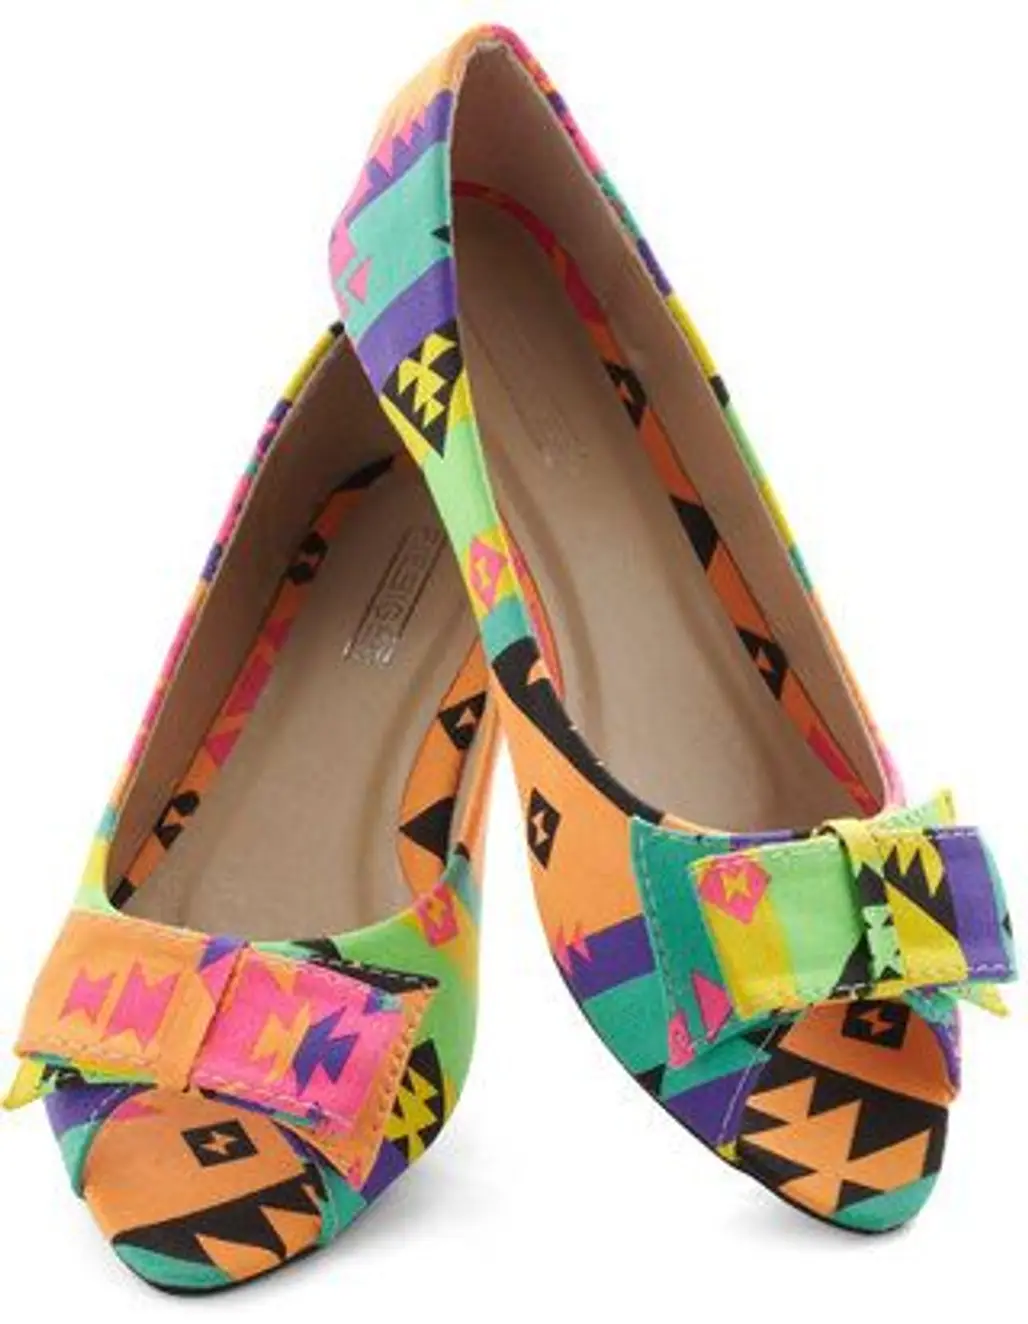 Printed Flat Shoes